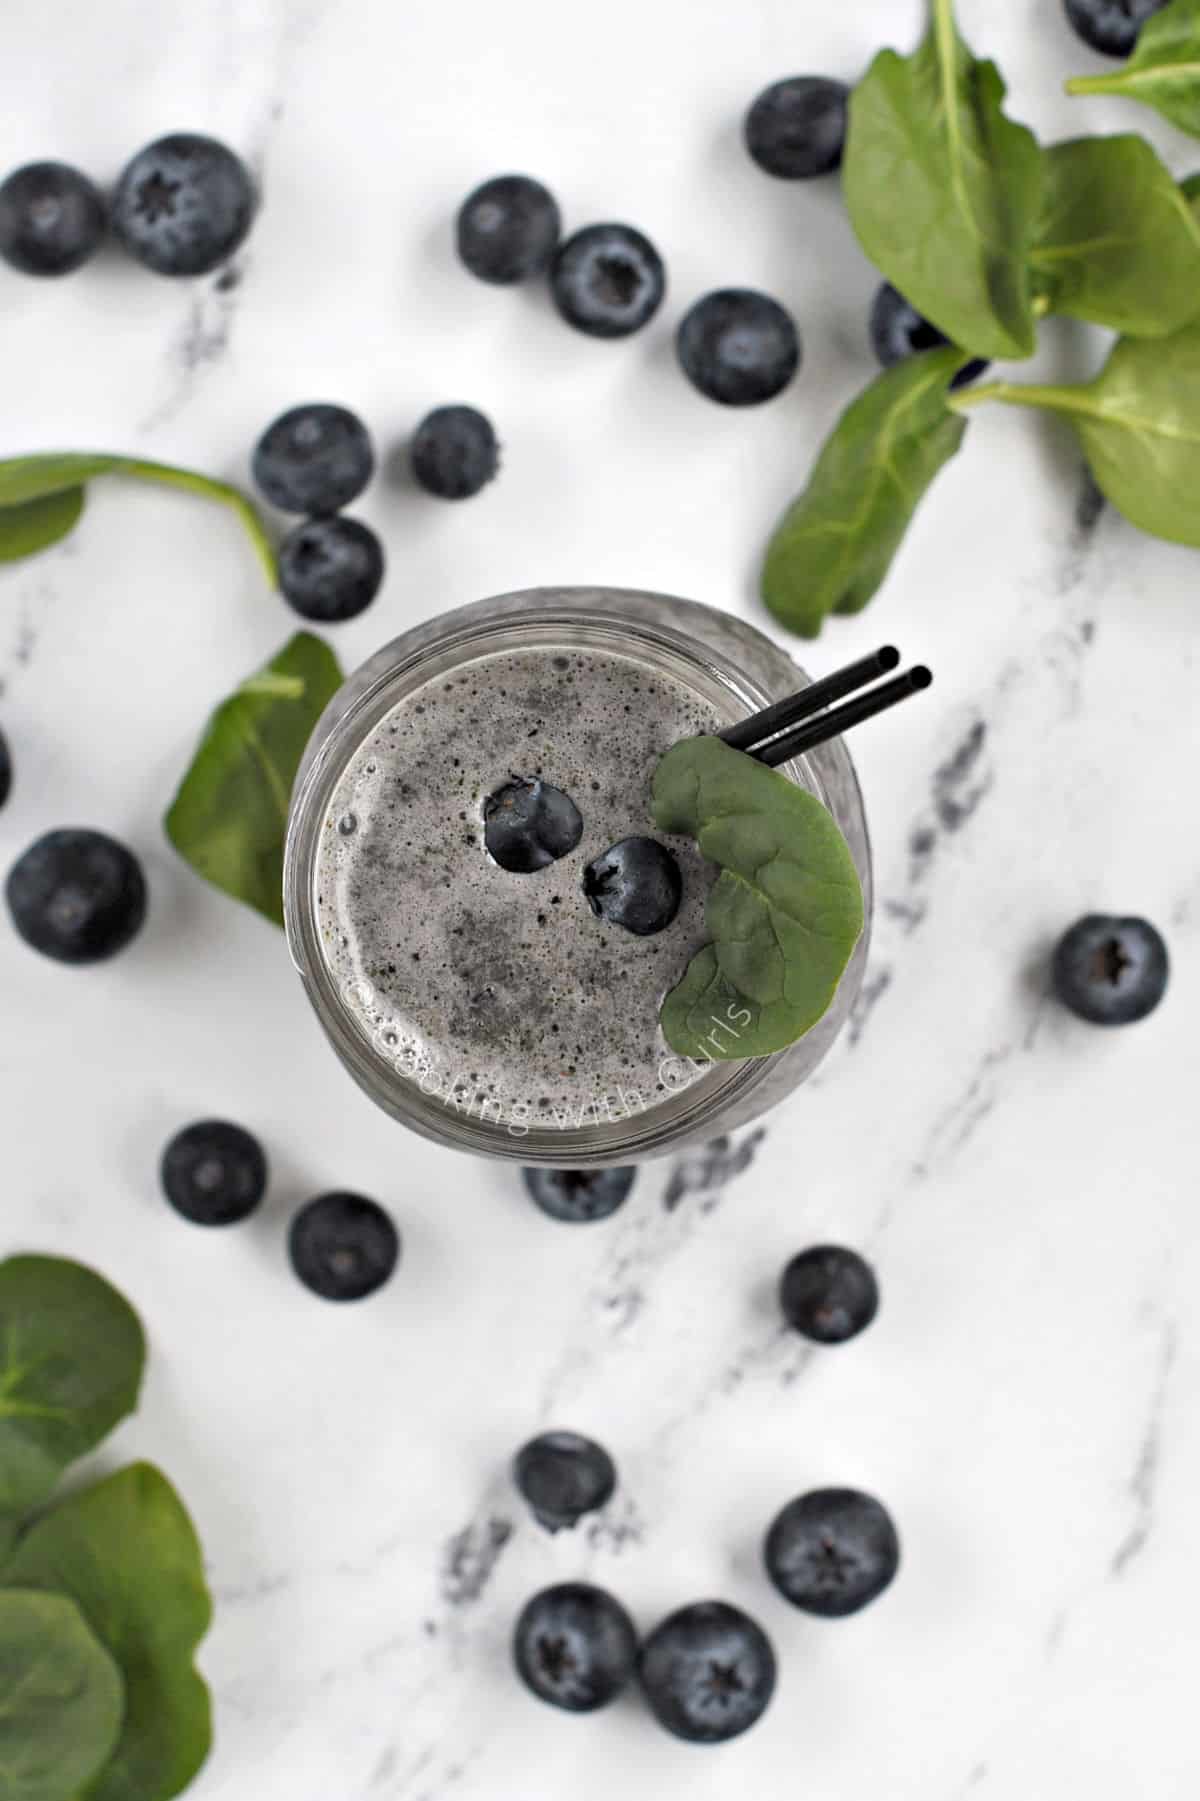 Looking down on a blue smoothie in a glass jar surrounded by fresh blueberries and spinach leaves.